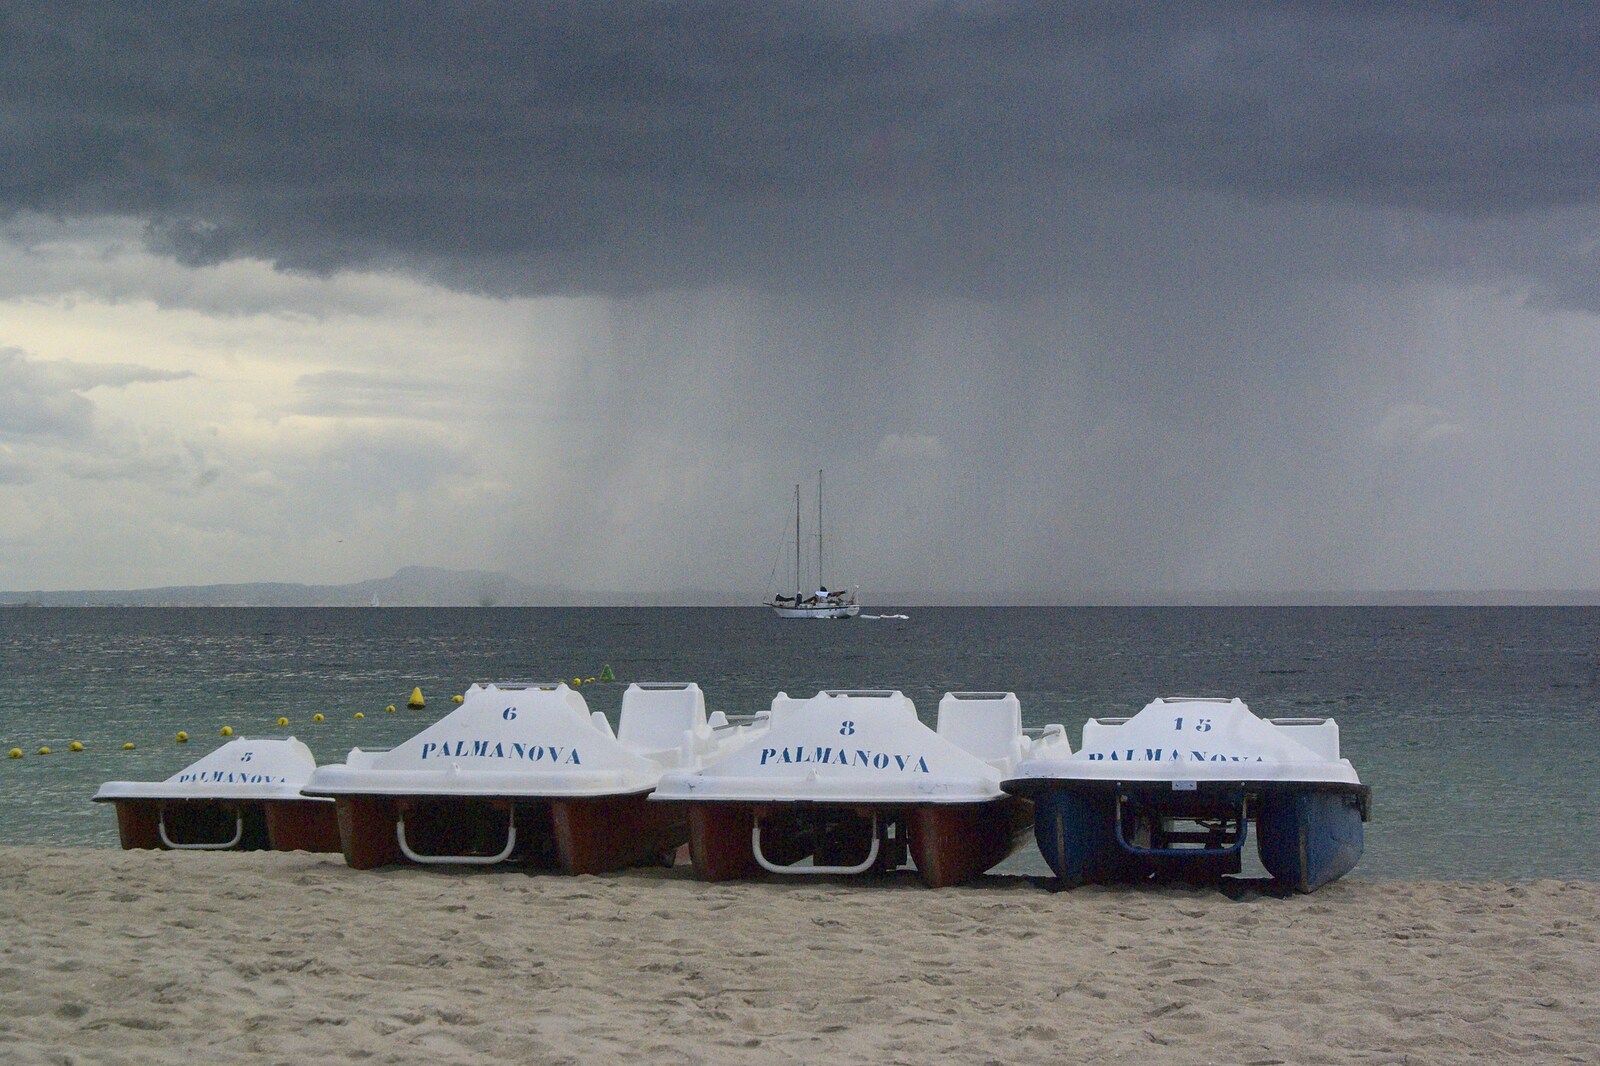 A wall of rain moves in from A Postcard From Palmanova, Mallorca, Spain - 21st September 2009